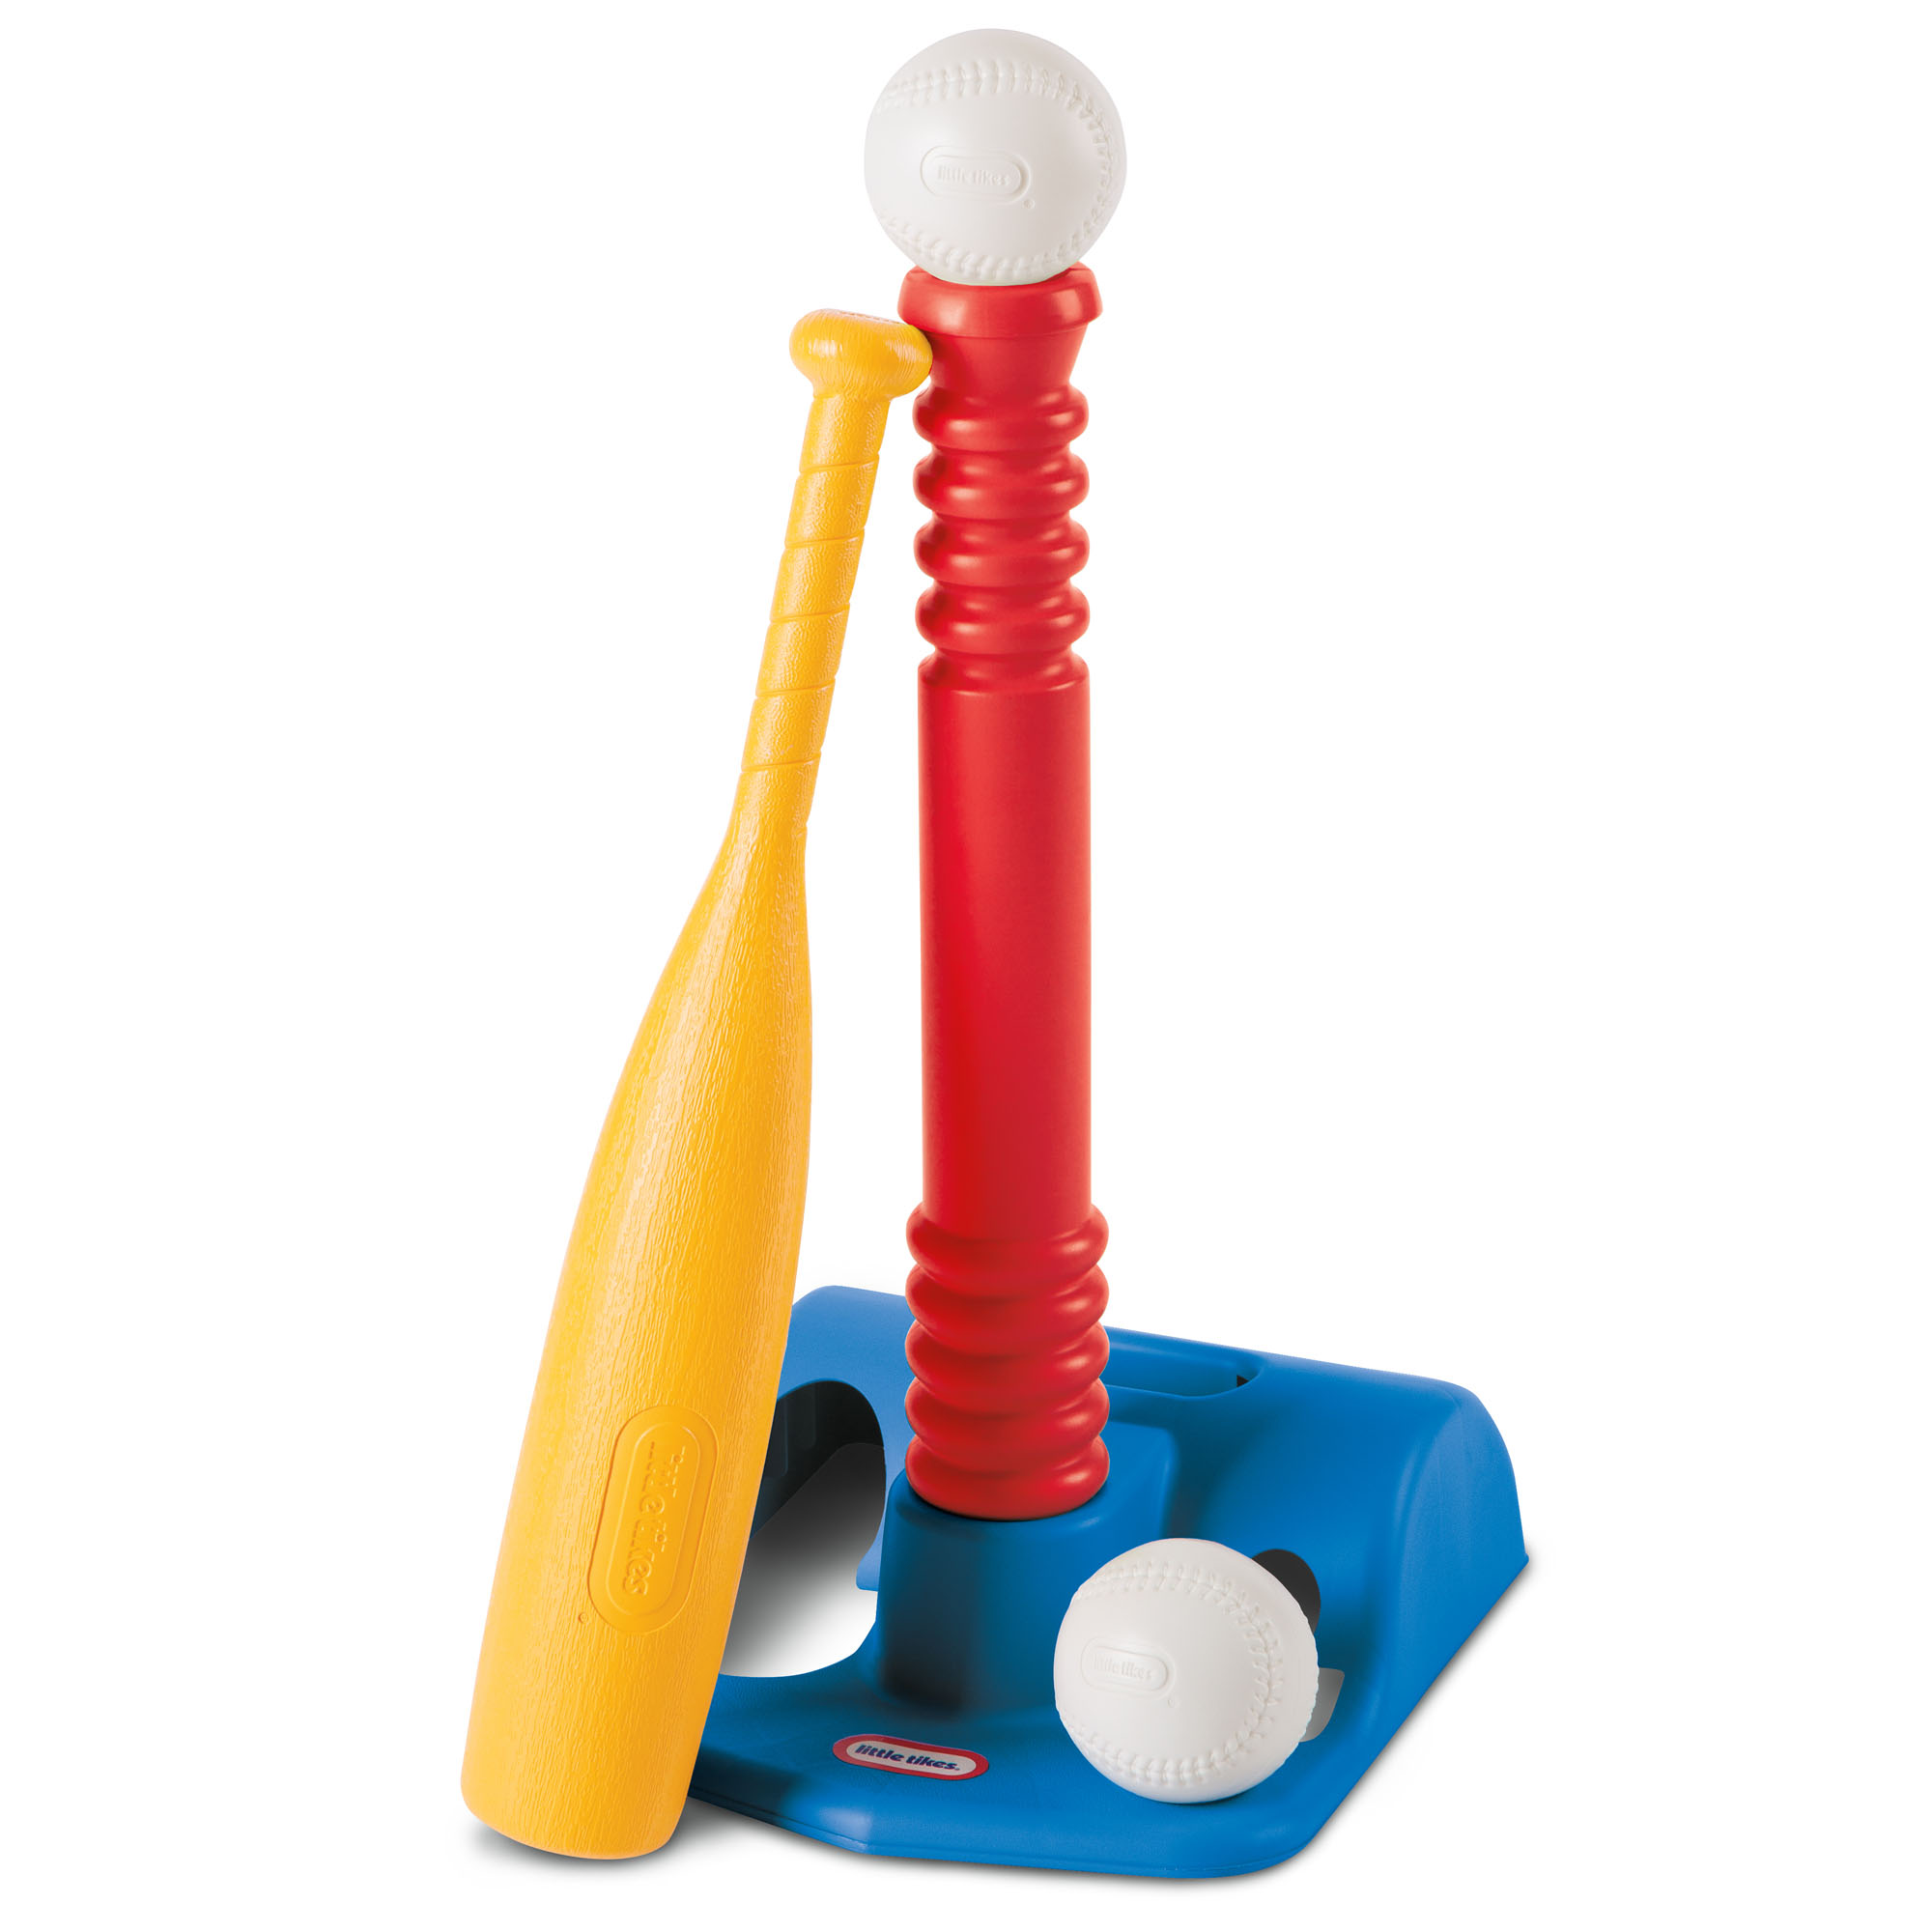 Little Tikes TotSports Kids T-Ball Set with Bat and 2 Balls, Ages 18 Months to 4 Years - image 3 of 6